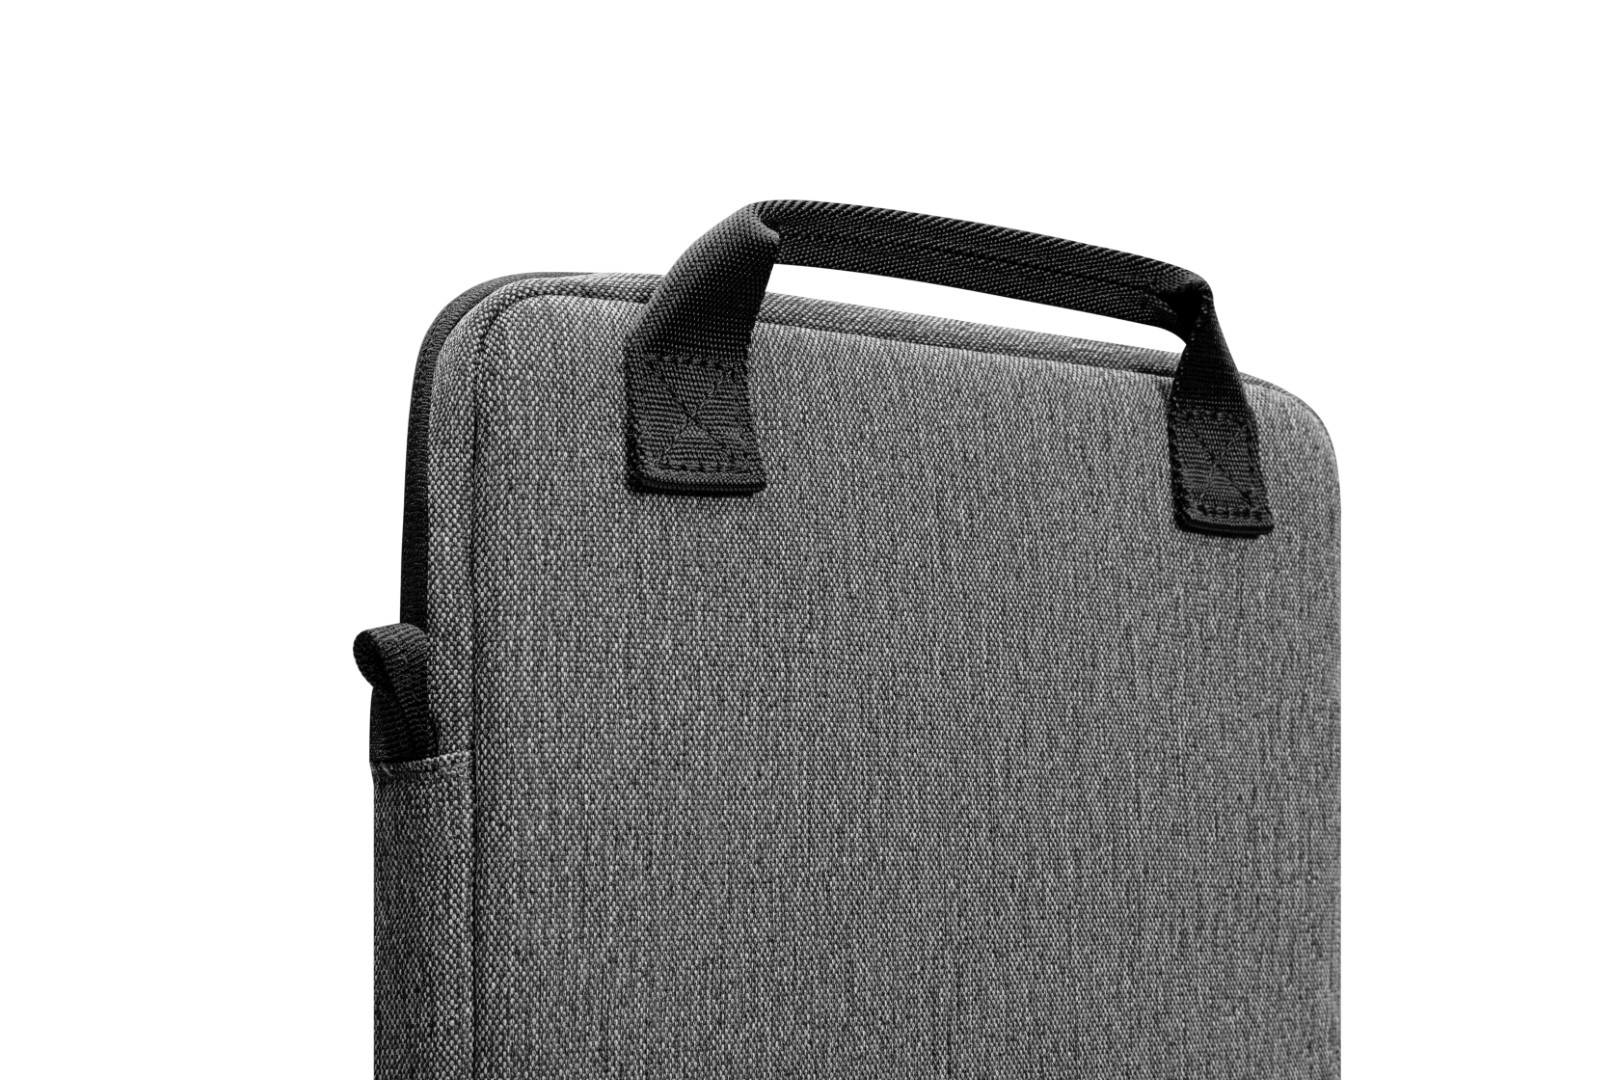 Túi Tomtoc (USA) Tablet Shoulder Bag For Ipad 360 Protection – H13